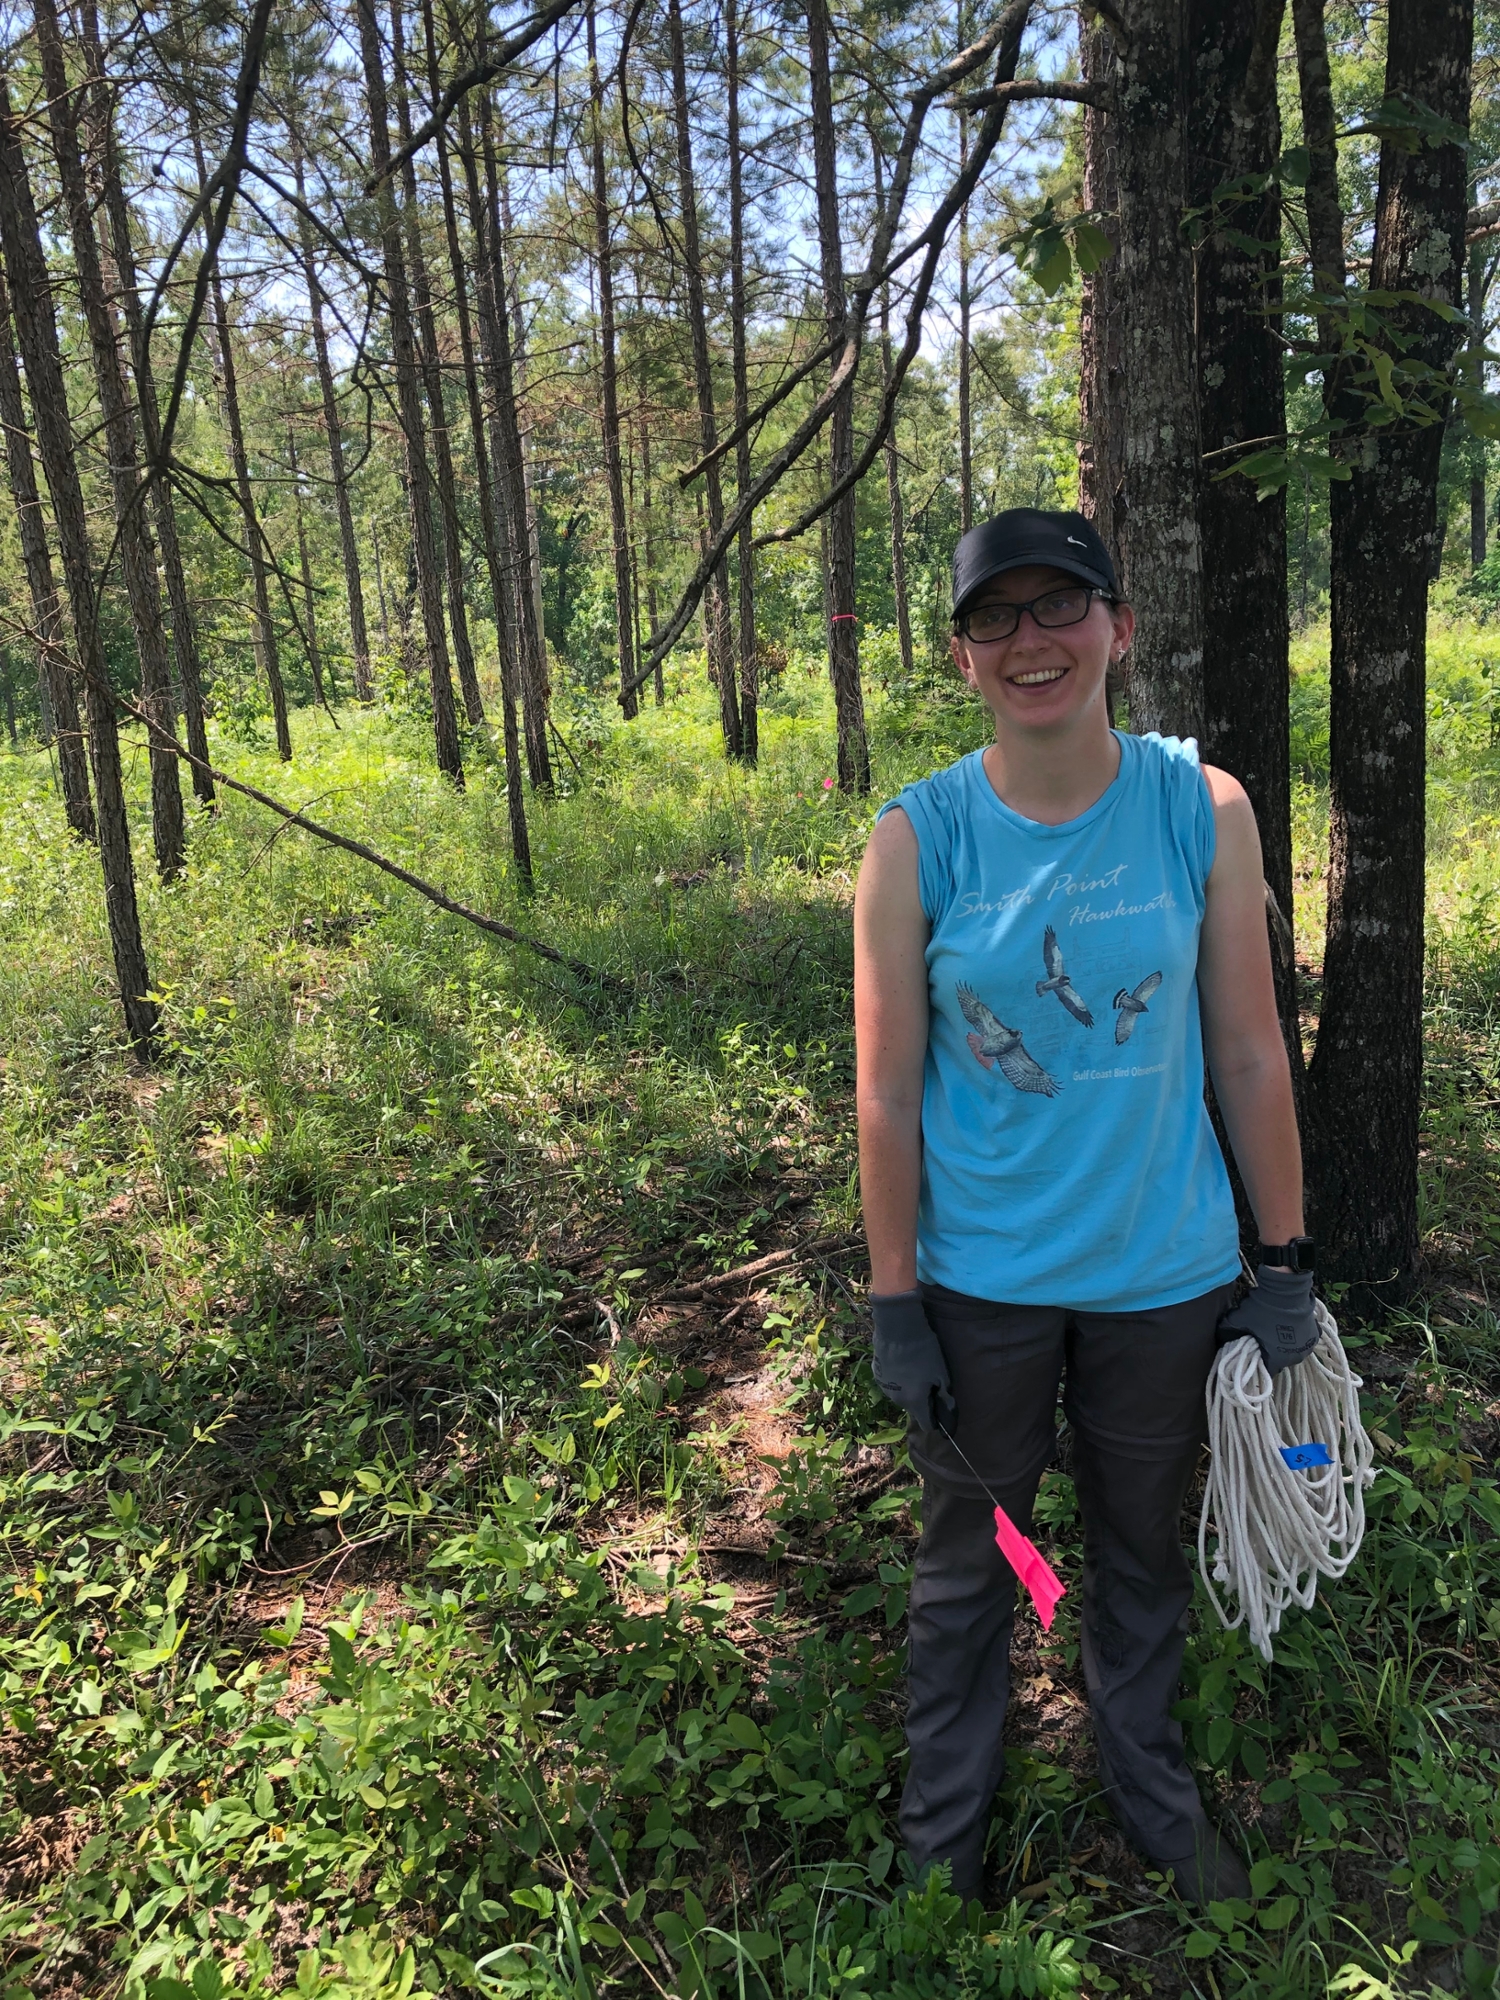 Biological Sciences graduate student receives grant through the Alabama Chapter of the Audubon Society to enhance conservation efforts in Black Belt Prairie